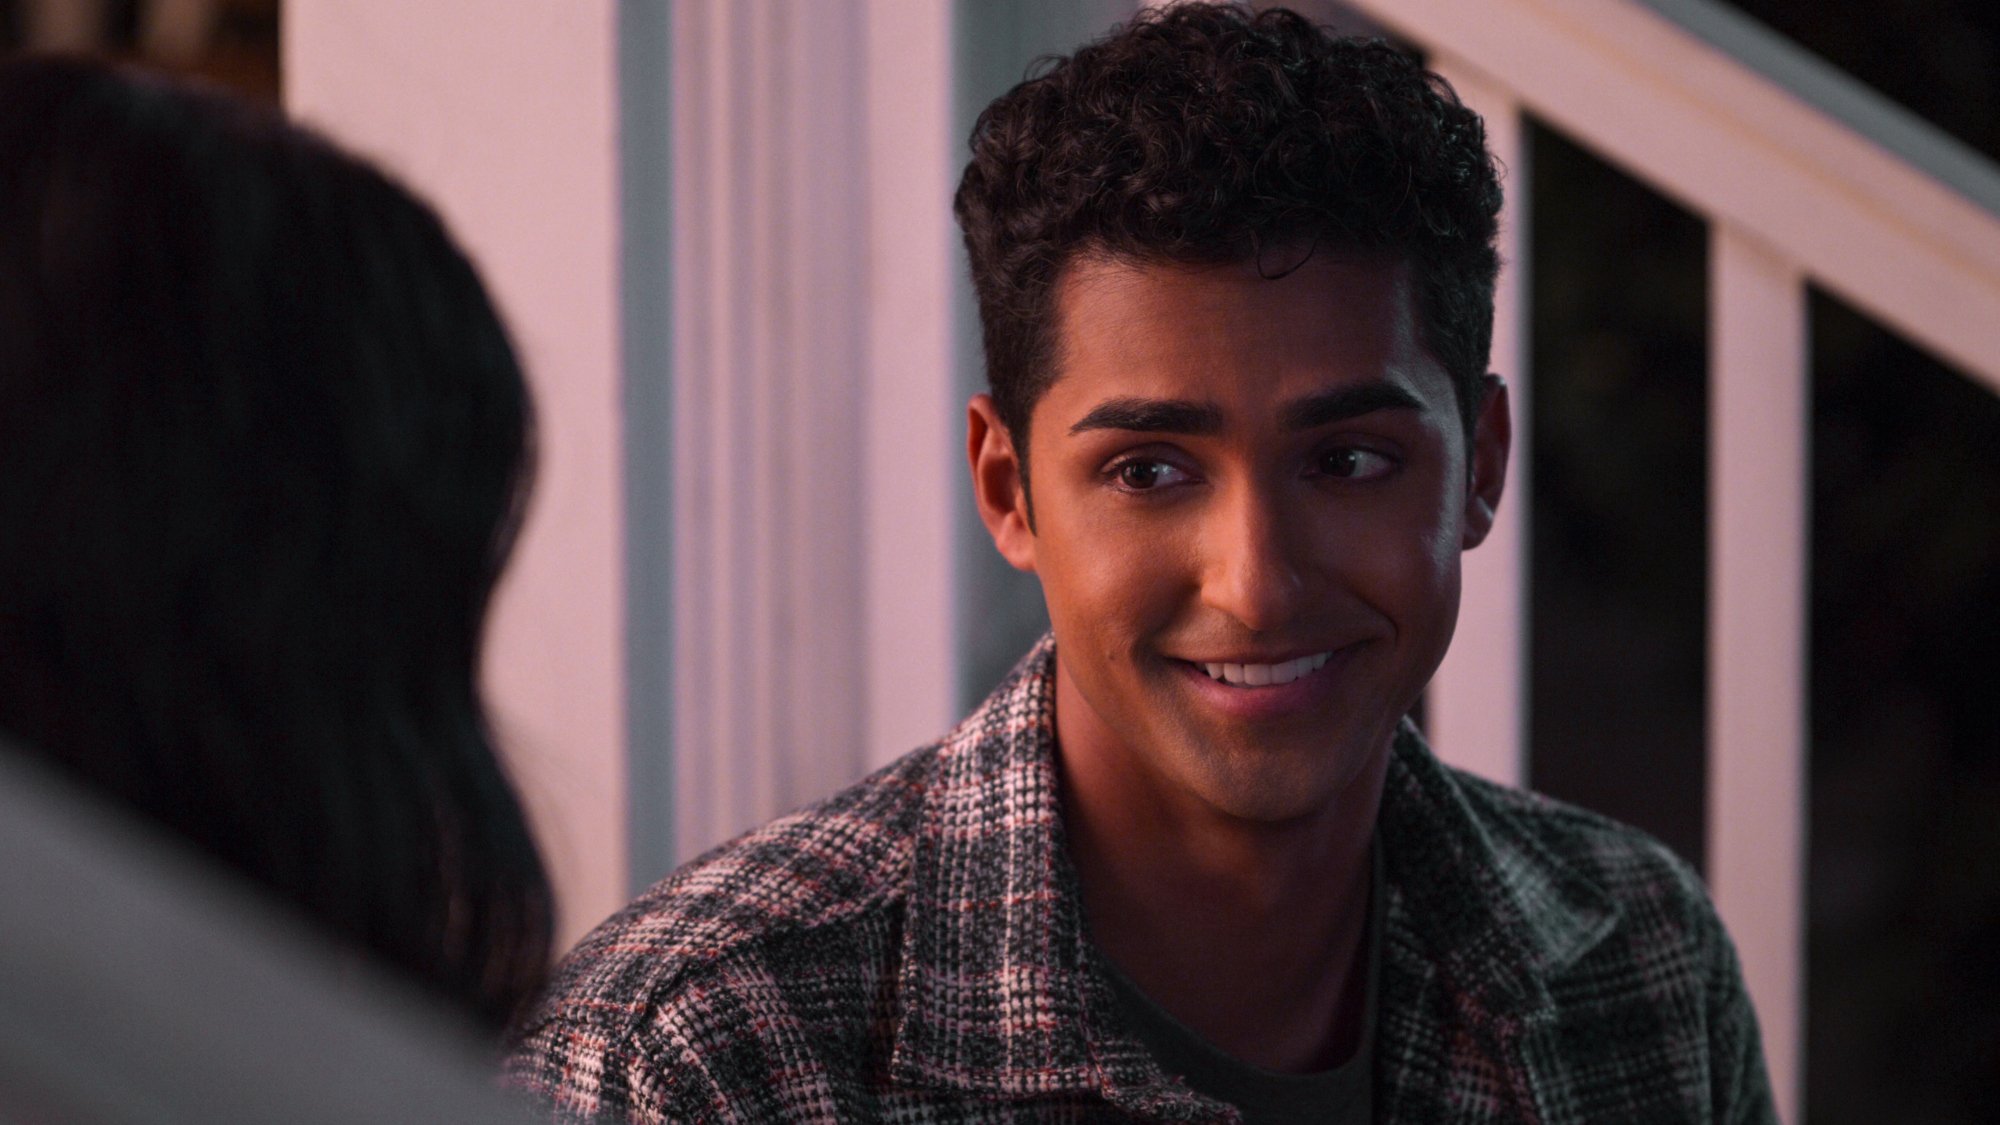 Anirudh Pisharody as Des talking to Devi in 'Never Have I Ever' Season 3.